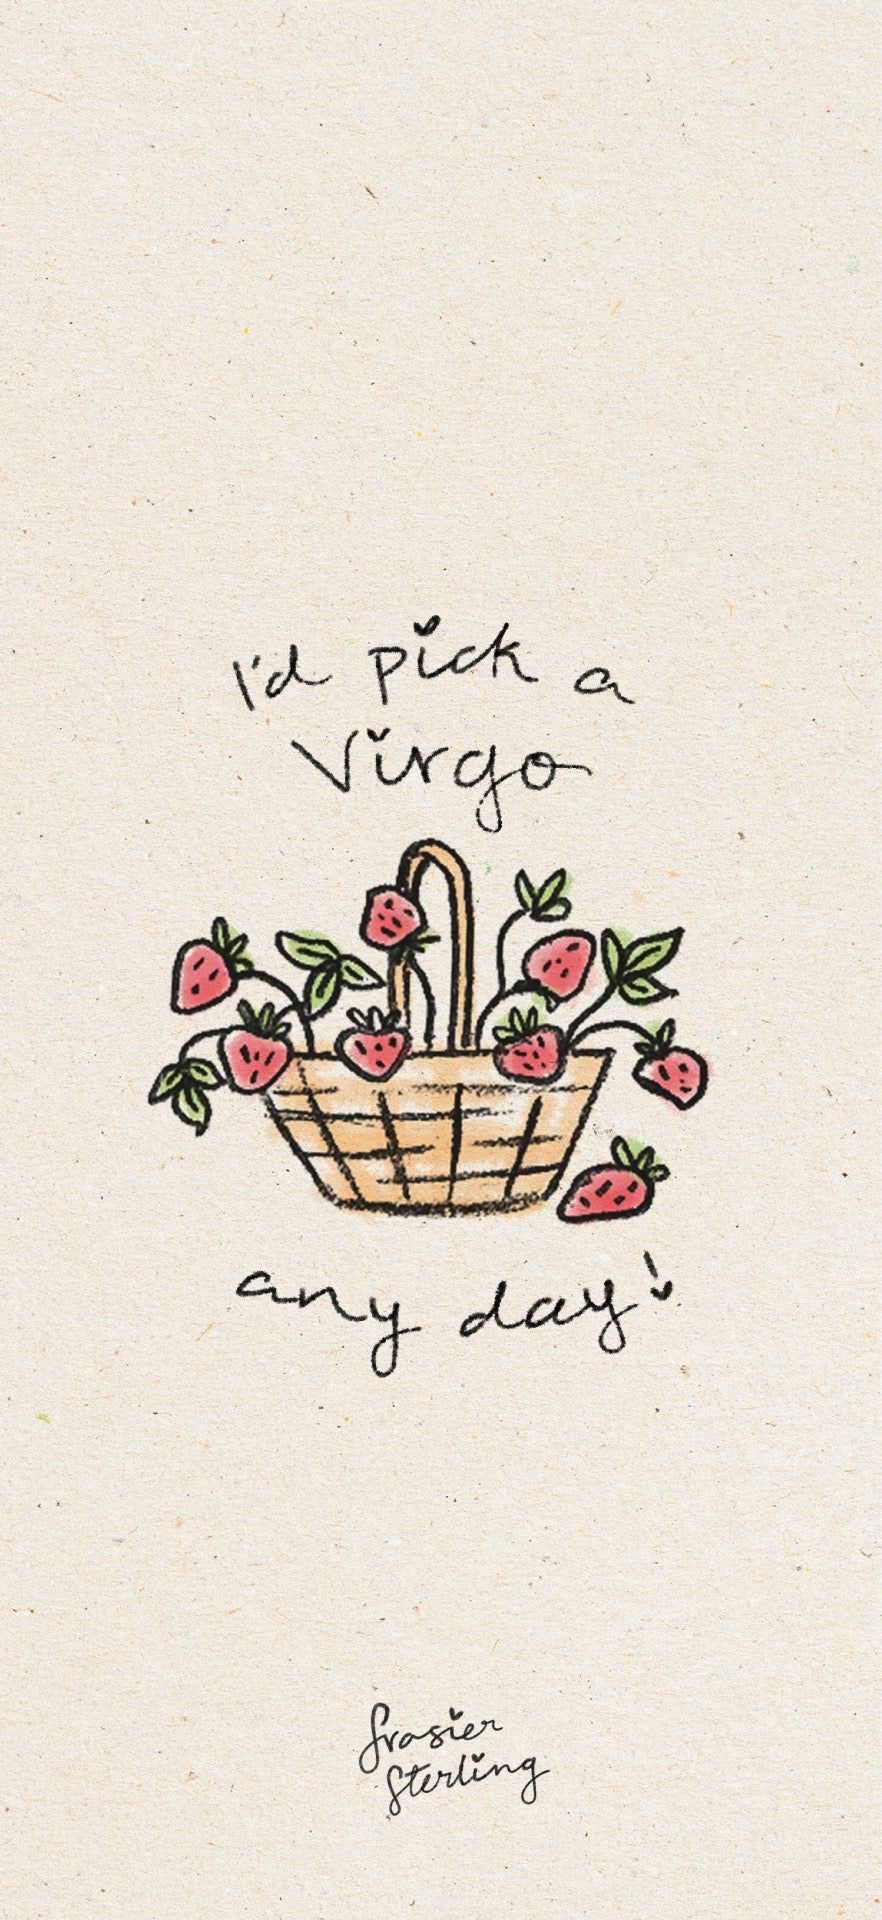 Phone wallpaper illustration of a basket of strawberries with the quote 